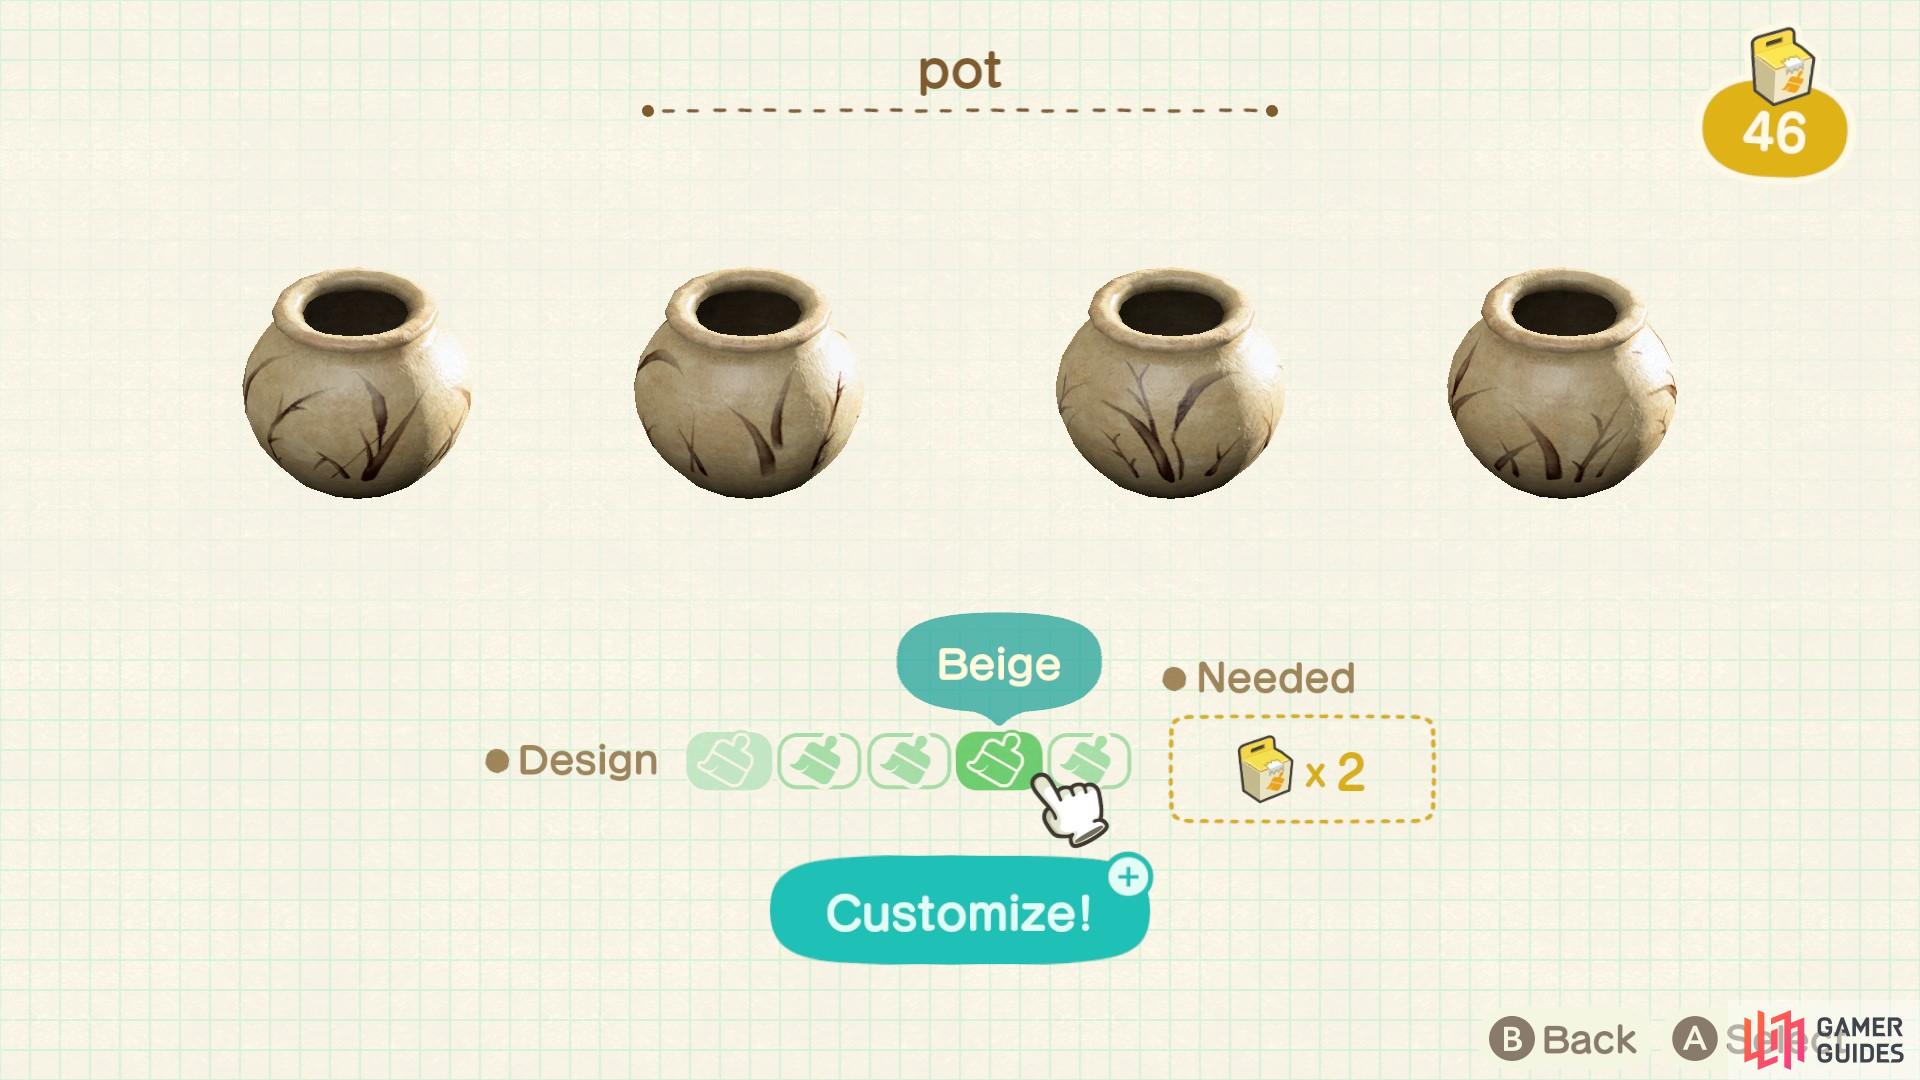 These pots are completely different art styles from each other